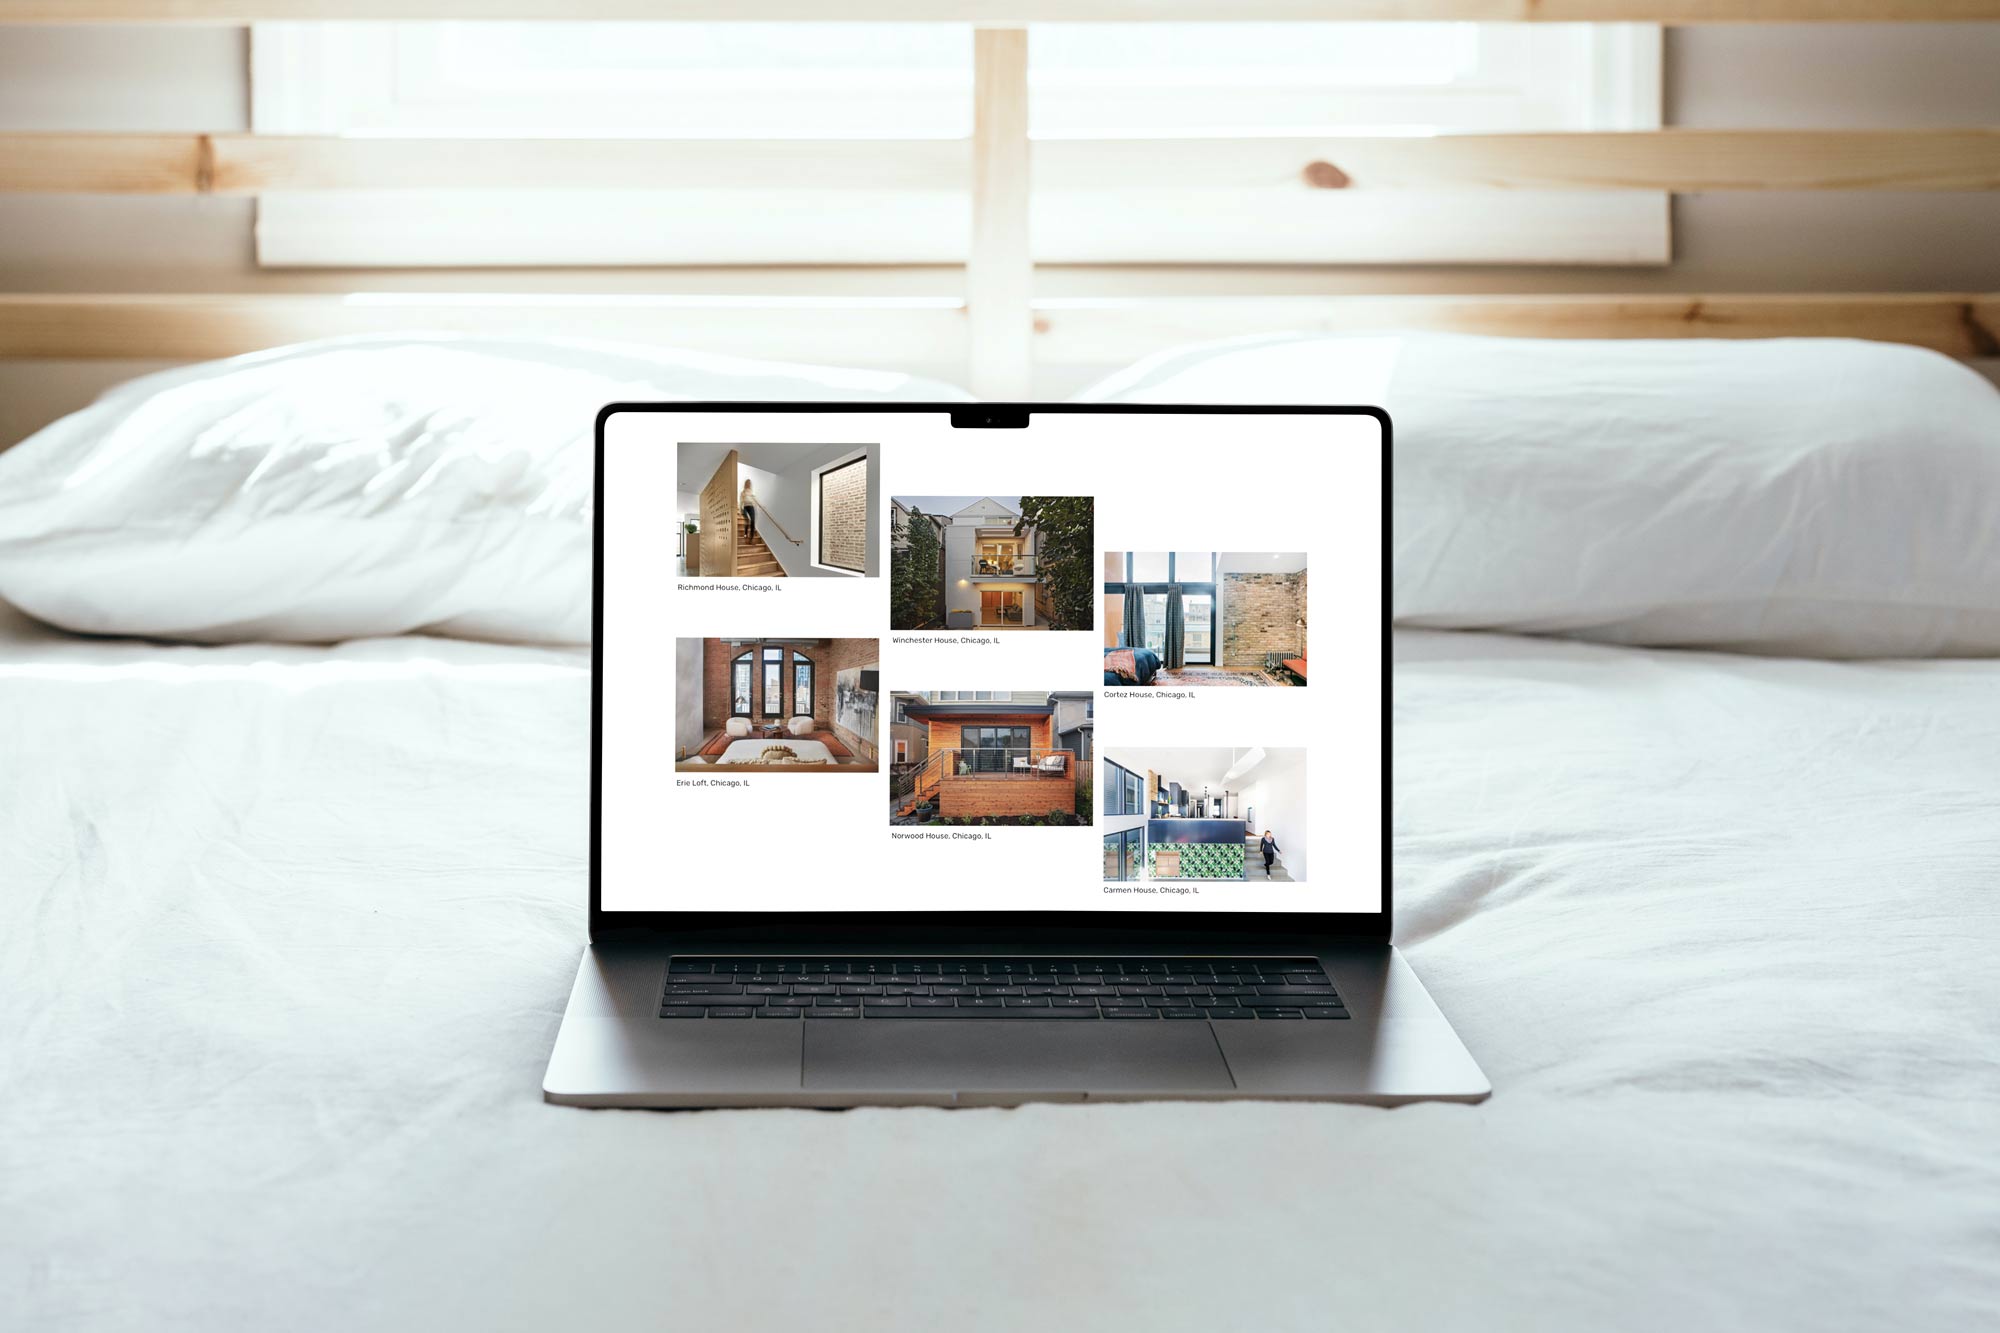 A UX home screen of an architecture website on a laptop sitting on a bed.